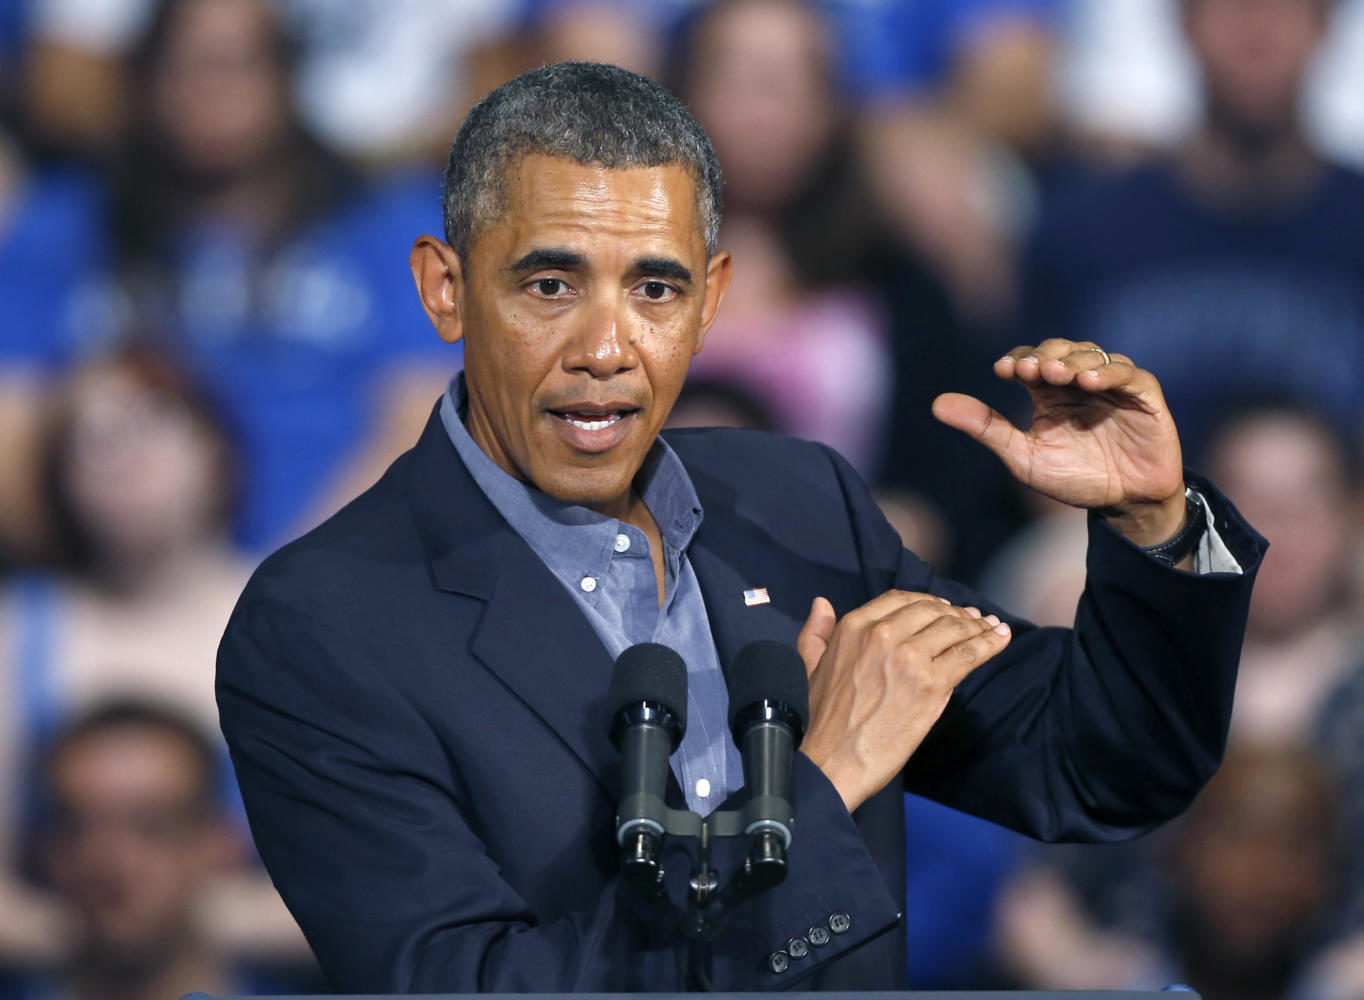 President+Barack+Obama+gestures+as+he+speaks+at+the+University+at+Buffalo%2C+the+State+University+of+New+York%2C+Thursday%2C+Aug.+22%2C+2013+in+Buffalo%2C+N.Y.%2C+where+he+began+his+two+day+bus+tour+to+speak+about+college+financial+aid.+%28AP+Photo%2FKeith+Srakocic%29